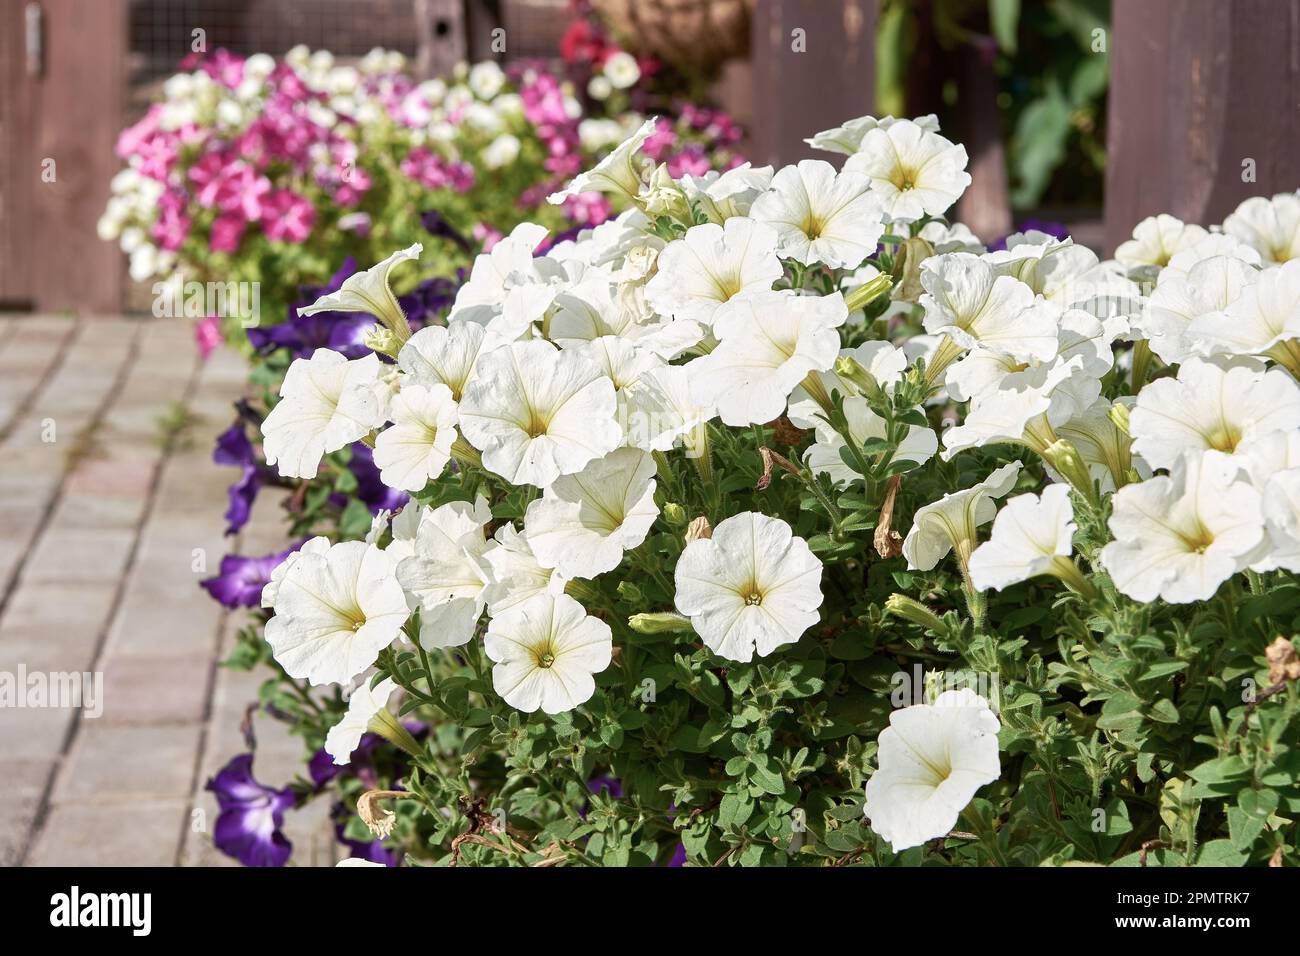 Beautiful Petunia flower with blooming pink petals on the balcony of the cottage. Stock Photo